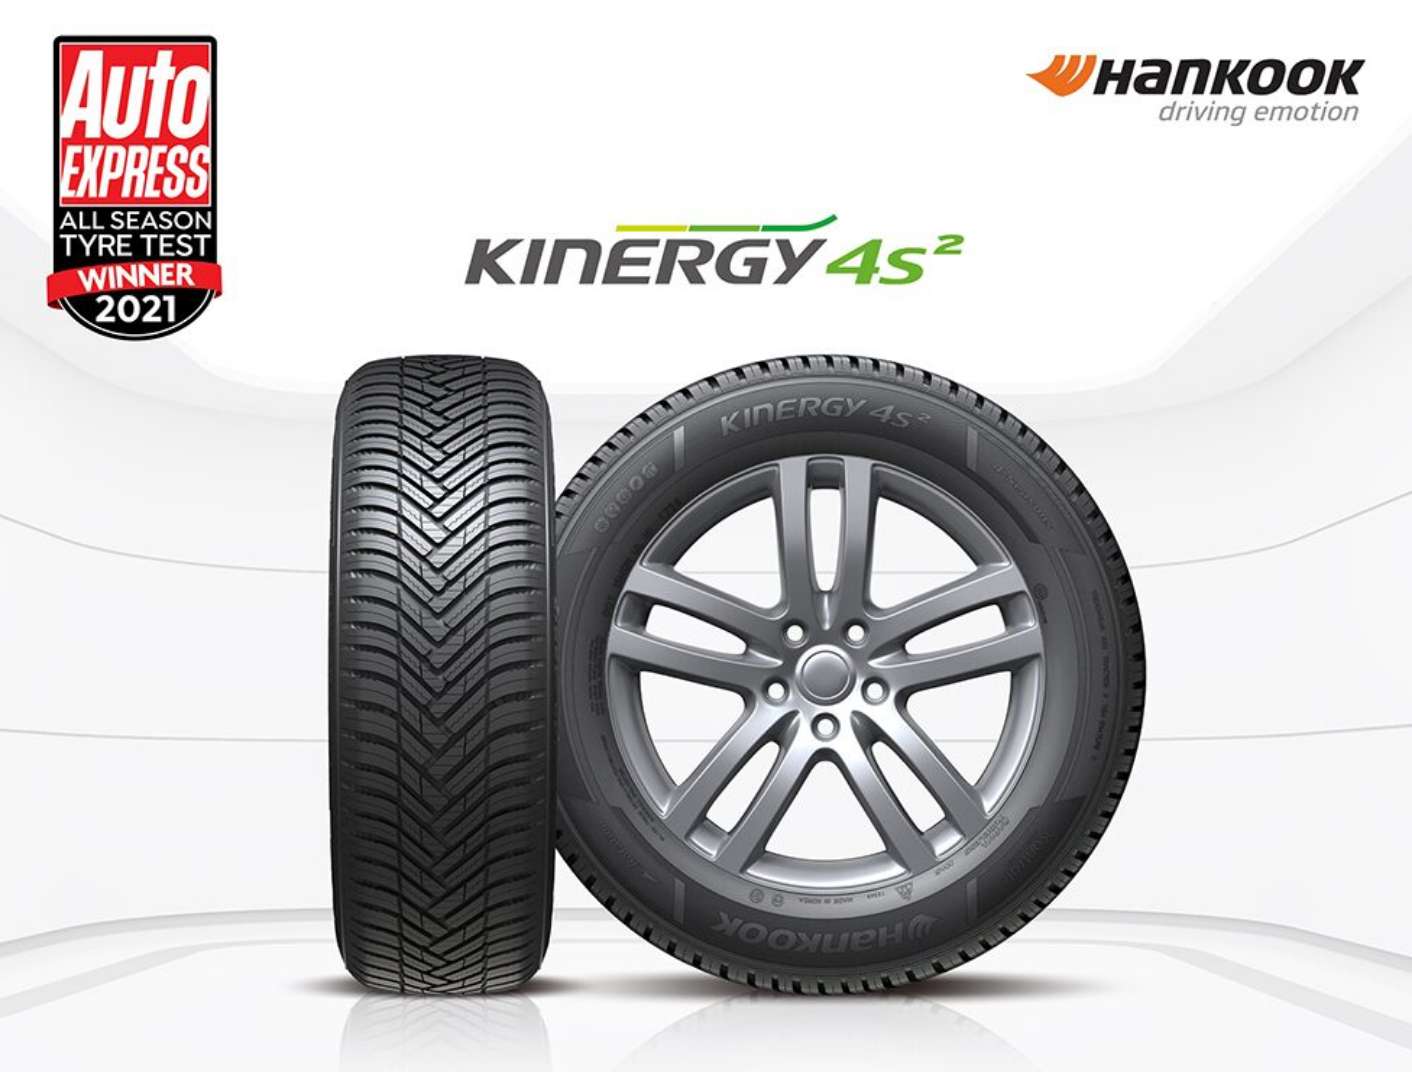 Hankook Tire’s Kinergy 4S 2 wins the Auto Express 2021 All-Weather Tire Test